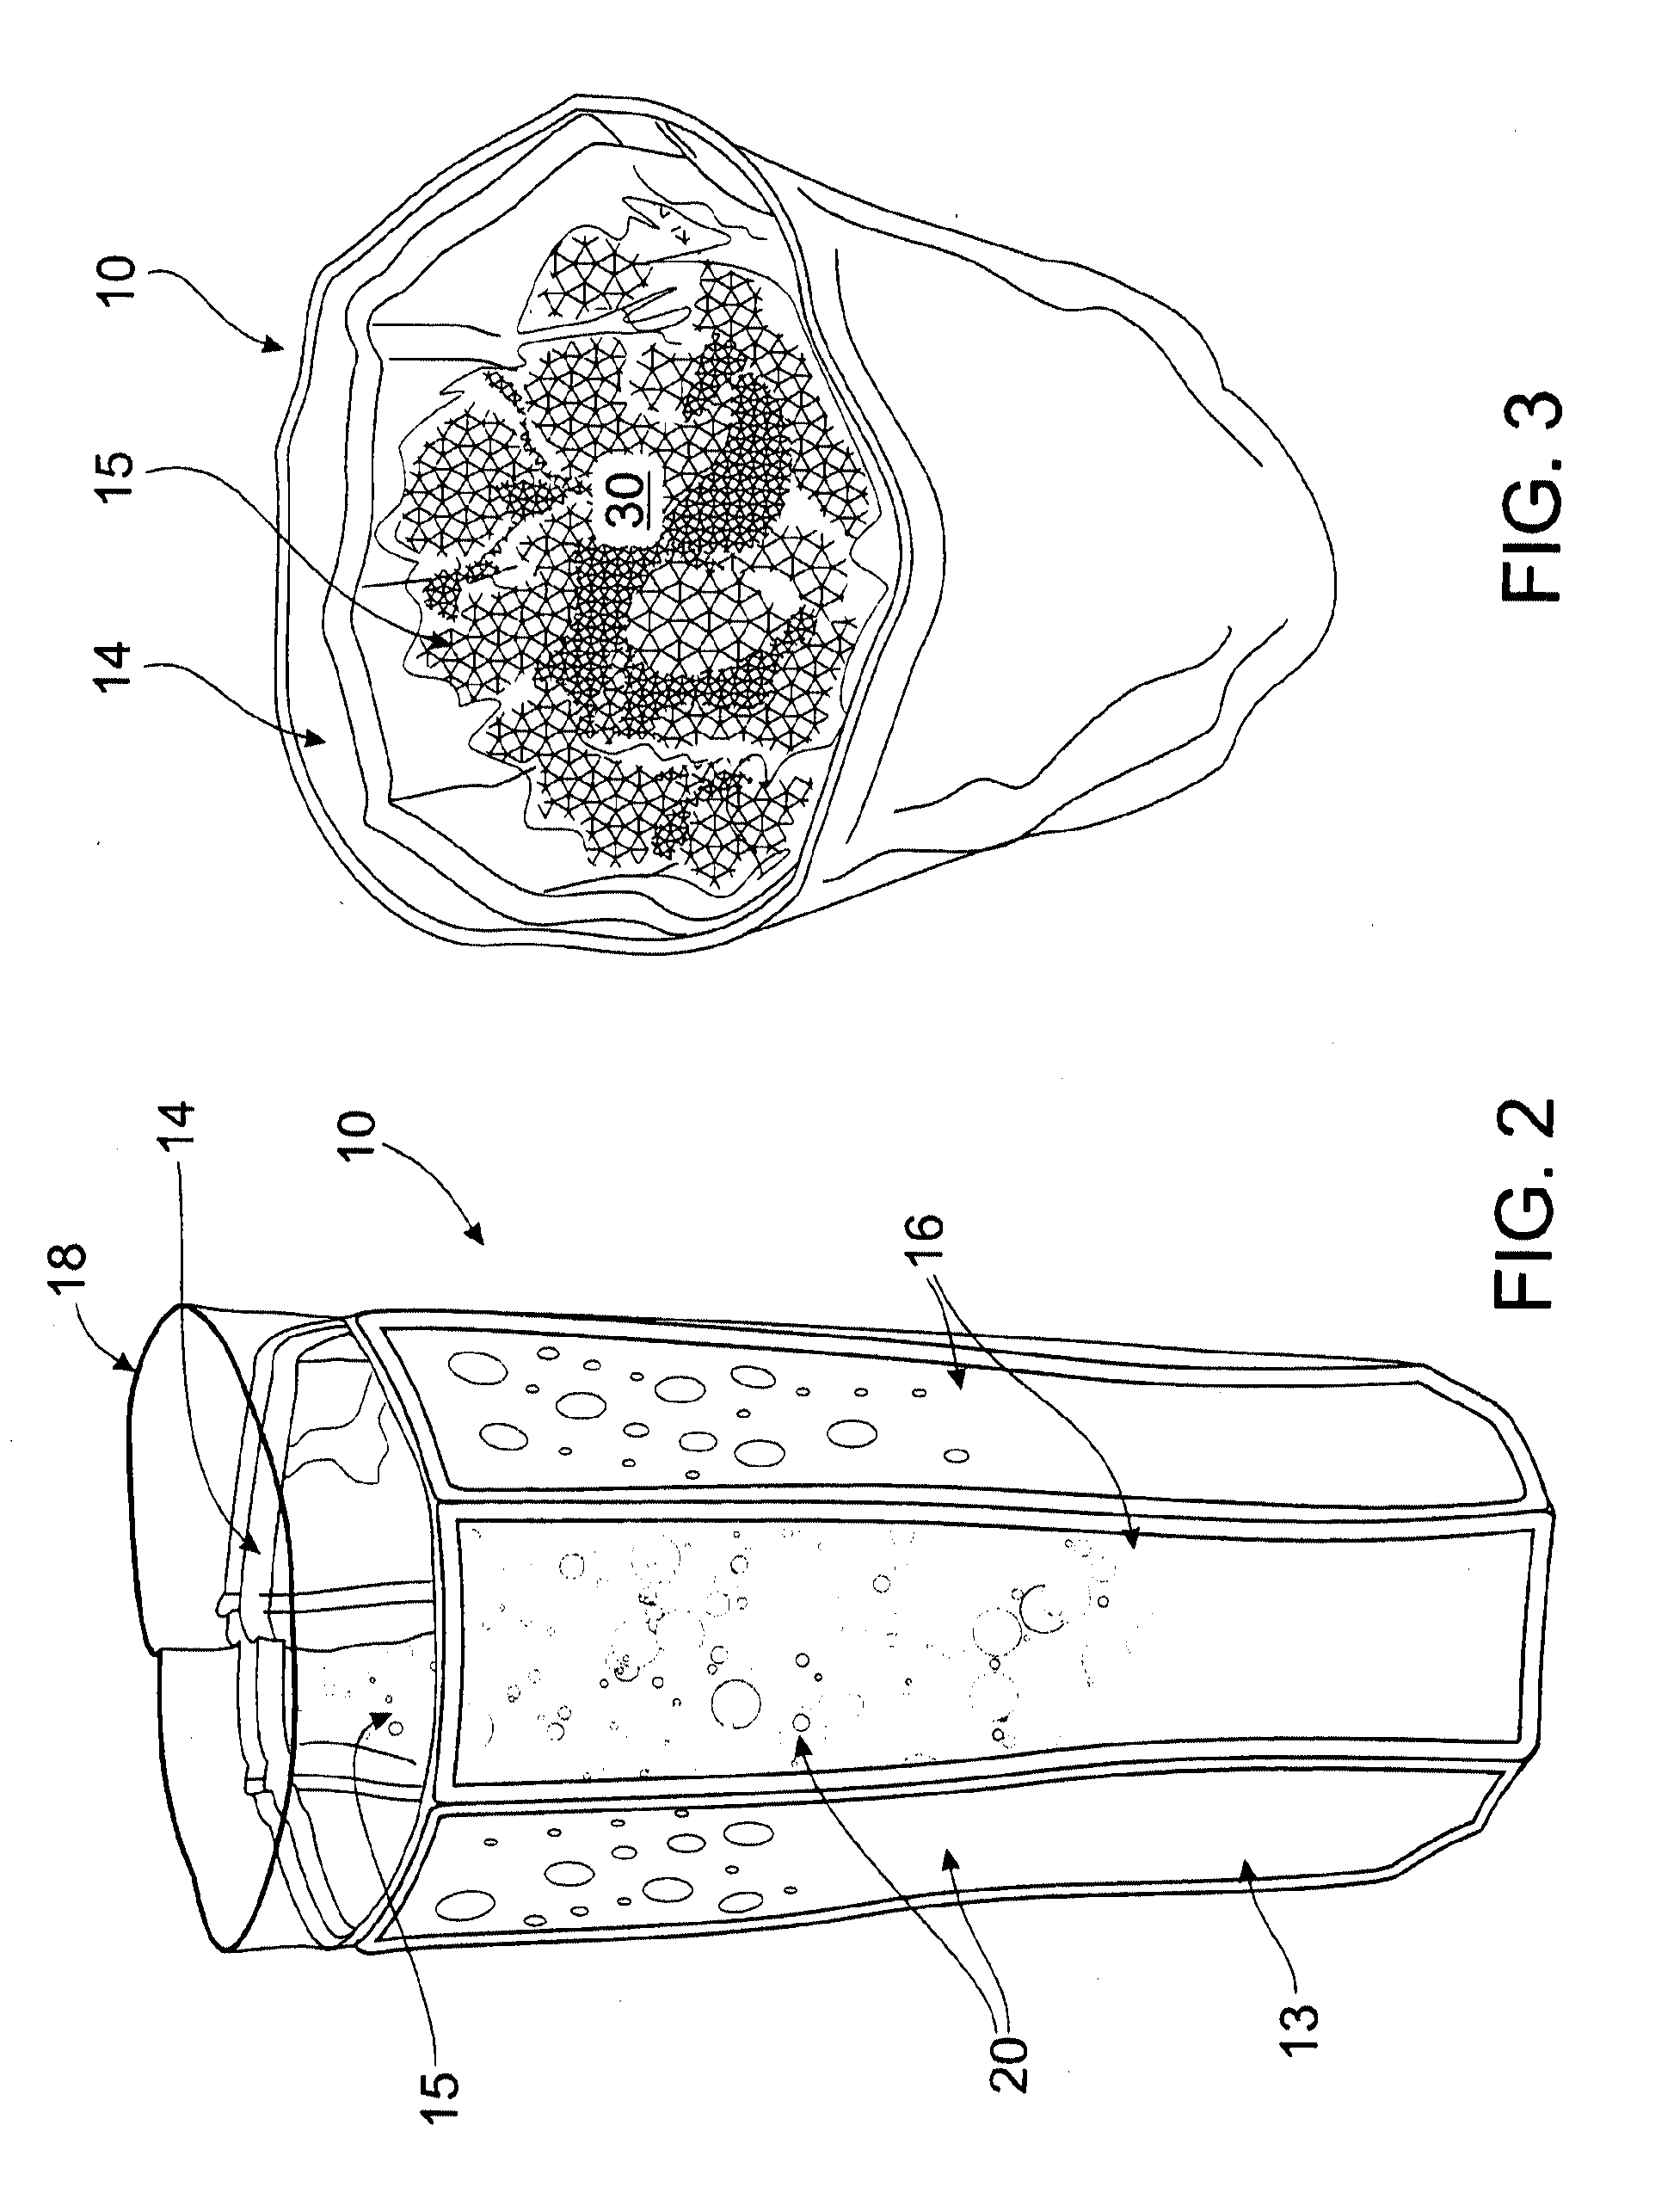 Method of, and apparatus for, making frozen beverage, ice cream and other frozen confections